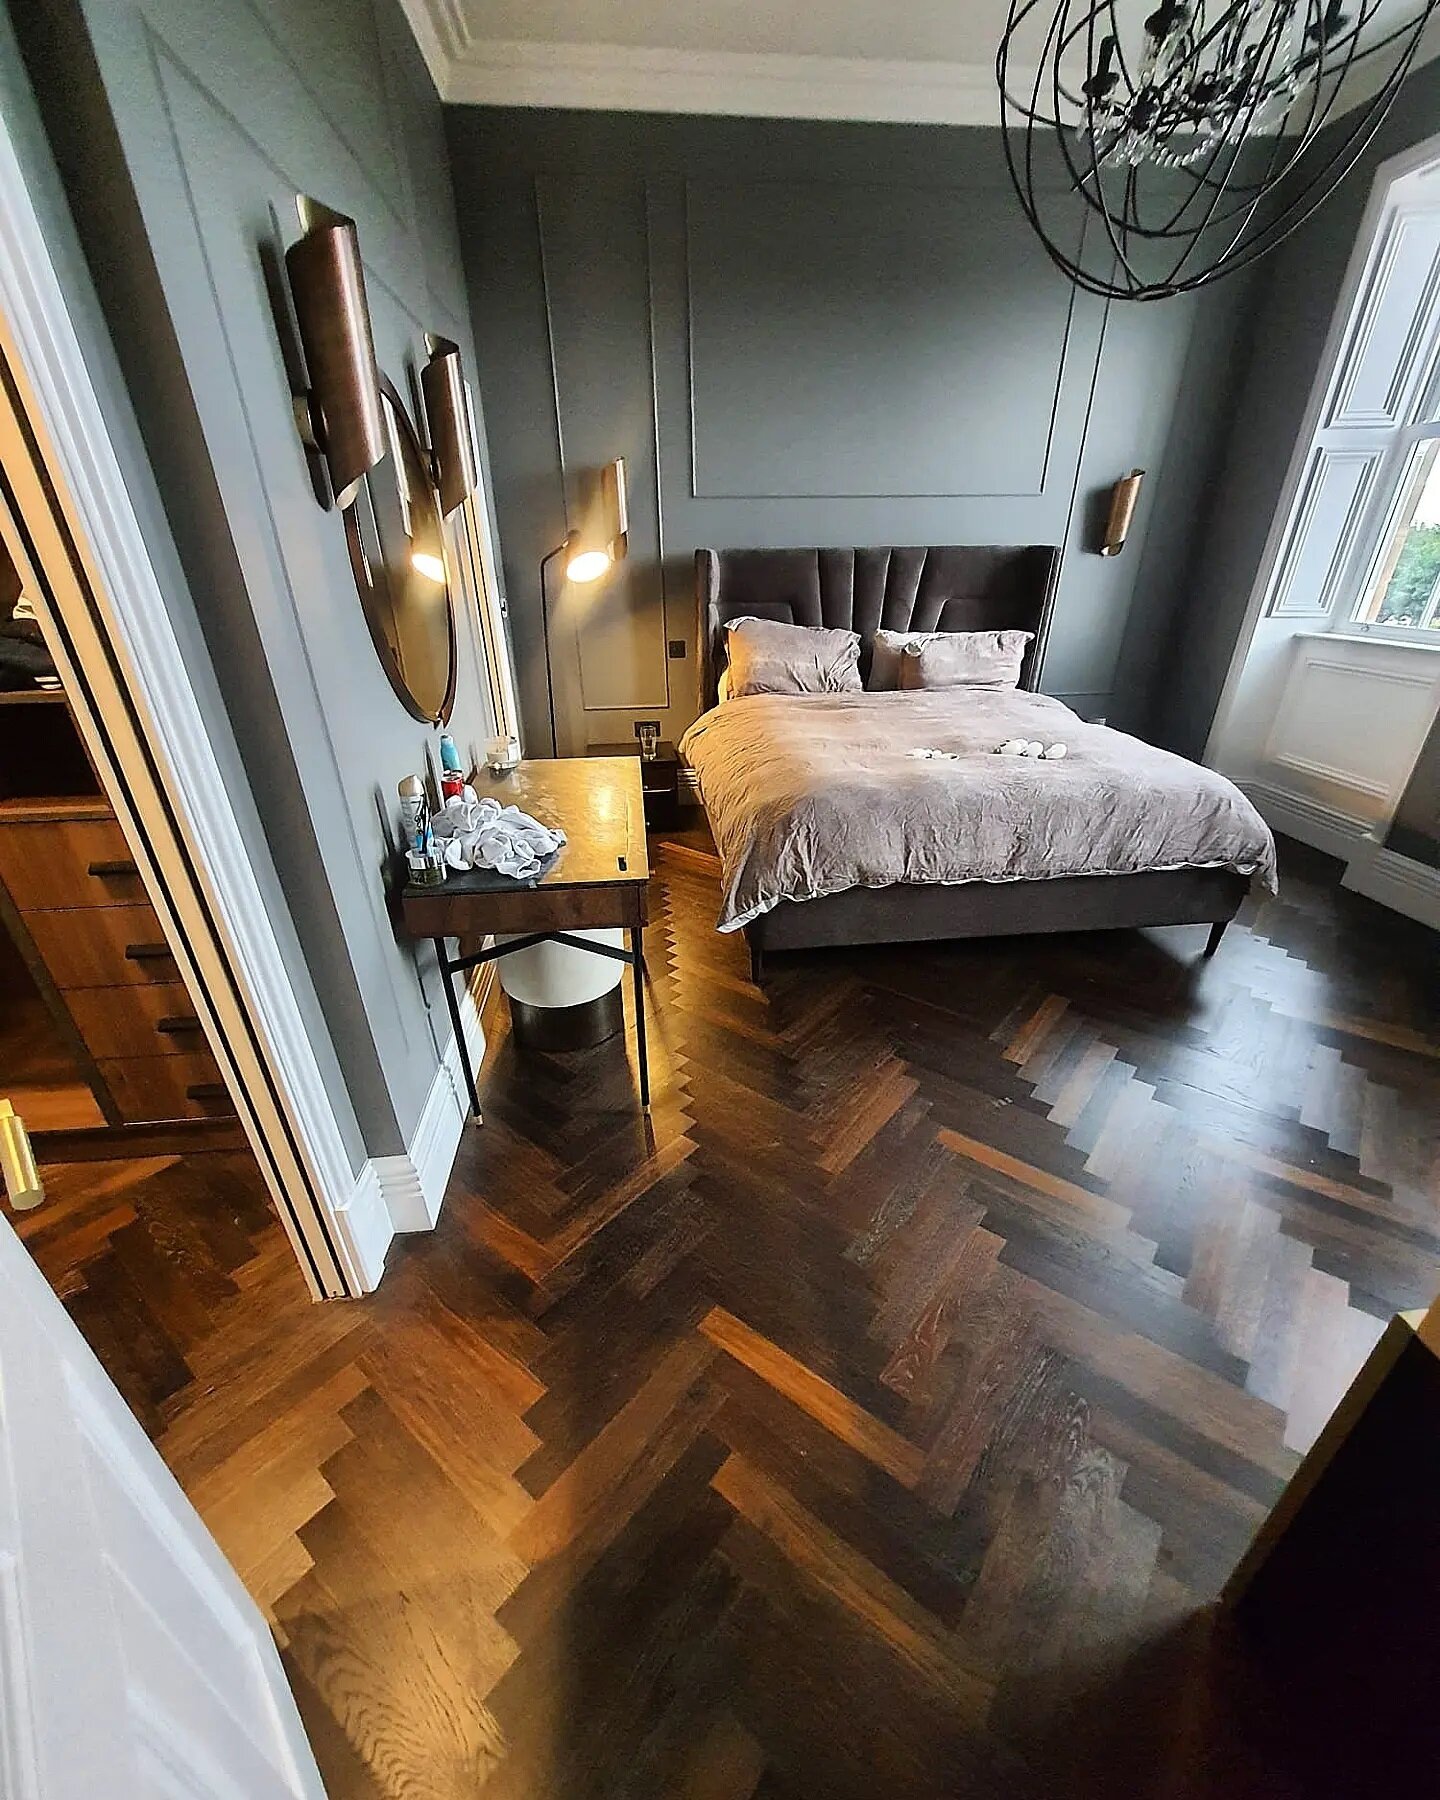 Deep and daring; our dark collection makes the perfect look for a cosy yet sleek bedroom 👌

#oakflooring #huscroftflooring #woodfloors #darkflooring #realwoodfloors #flooringinspiration #leedsbusiness